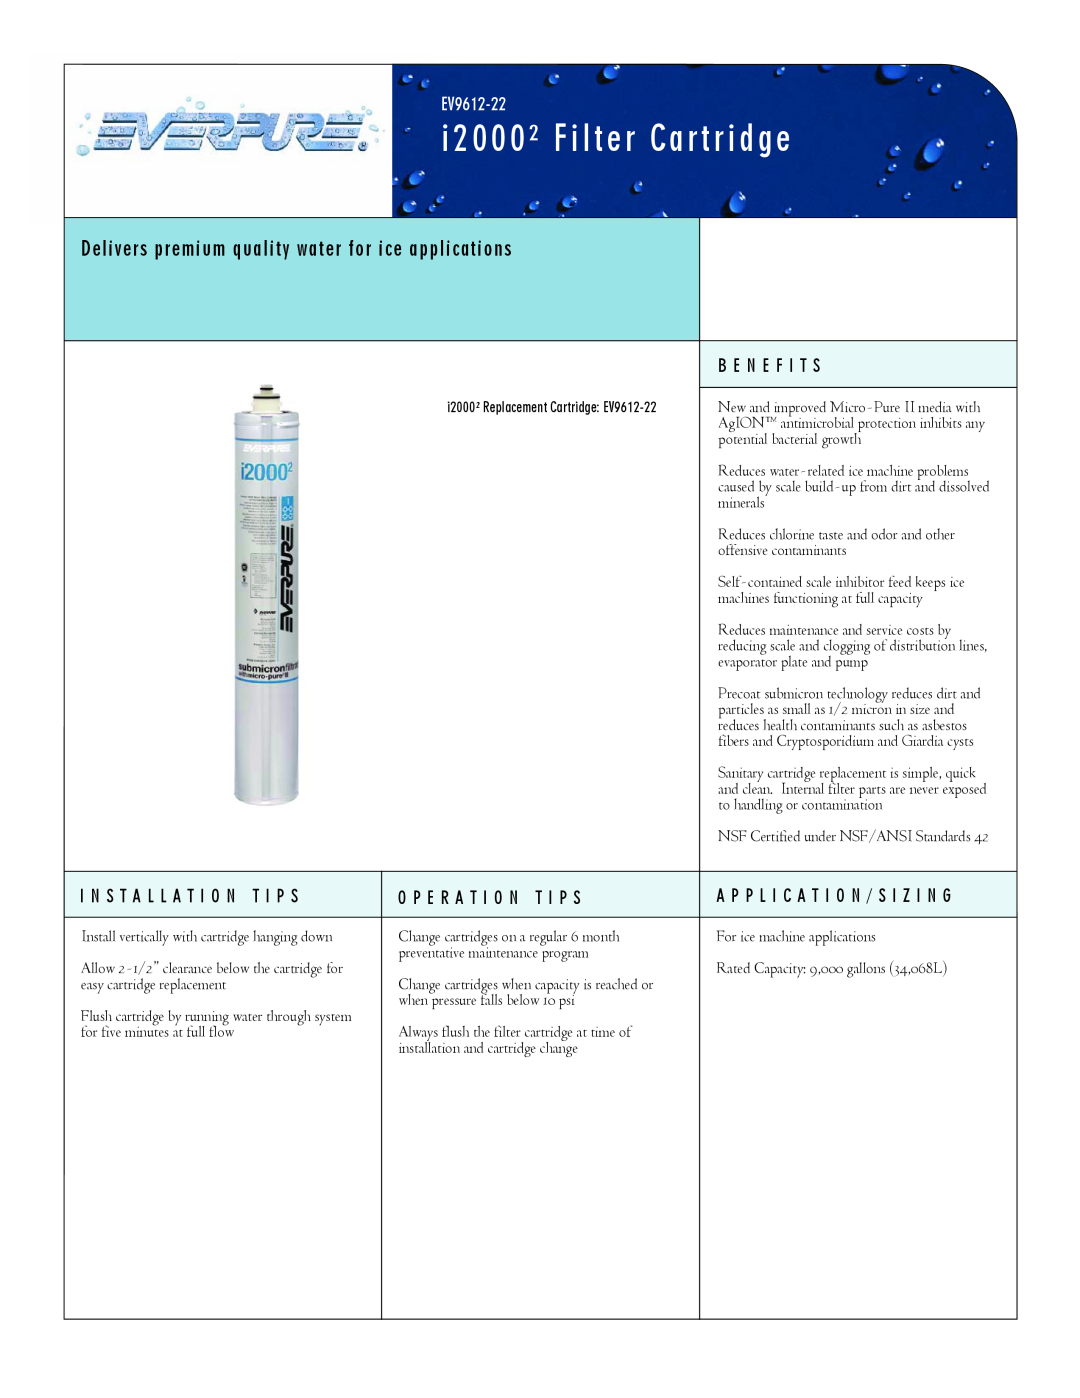 Everpure i20002 manual i2000² Filter Cartridge, Delivers premium quality water for ice applications, EV9612-22 